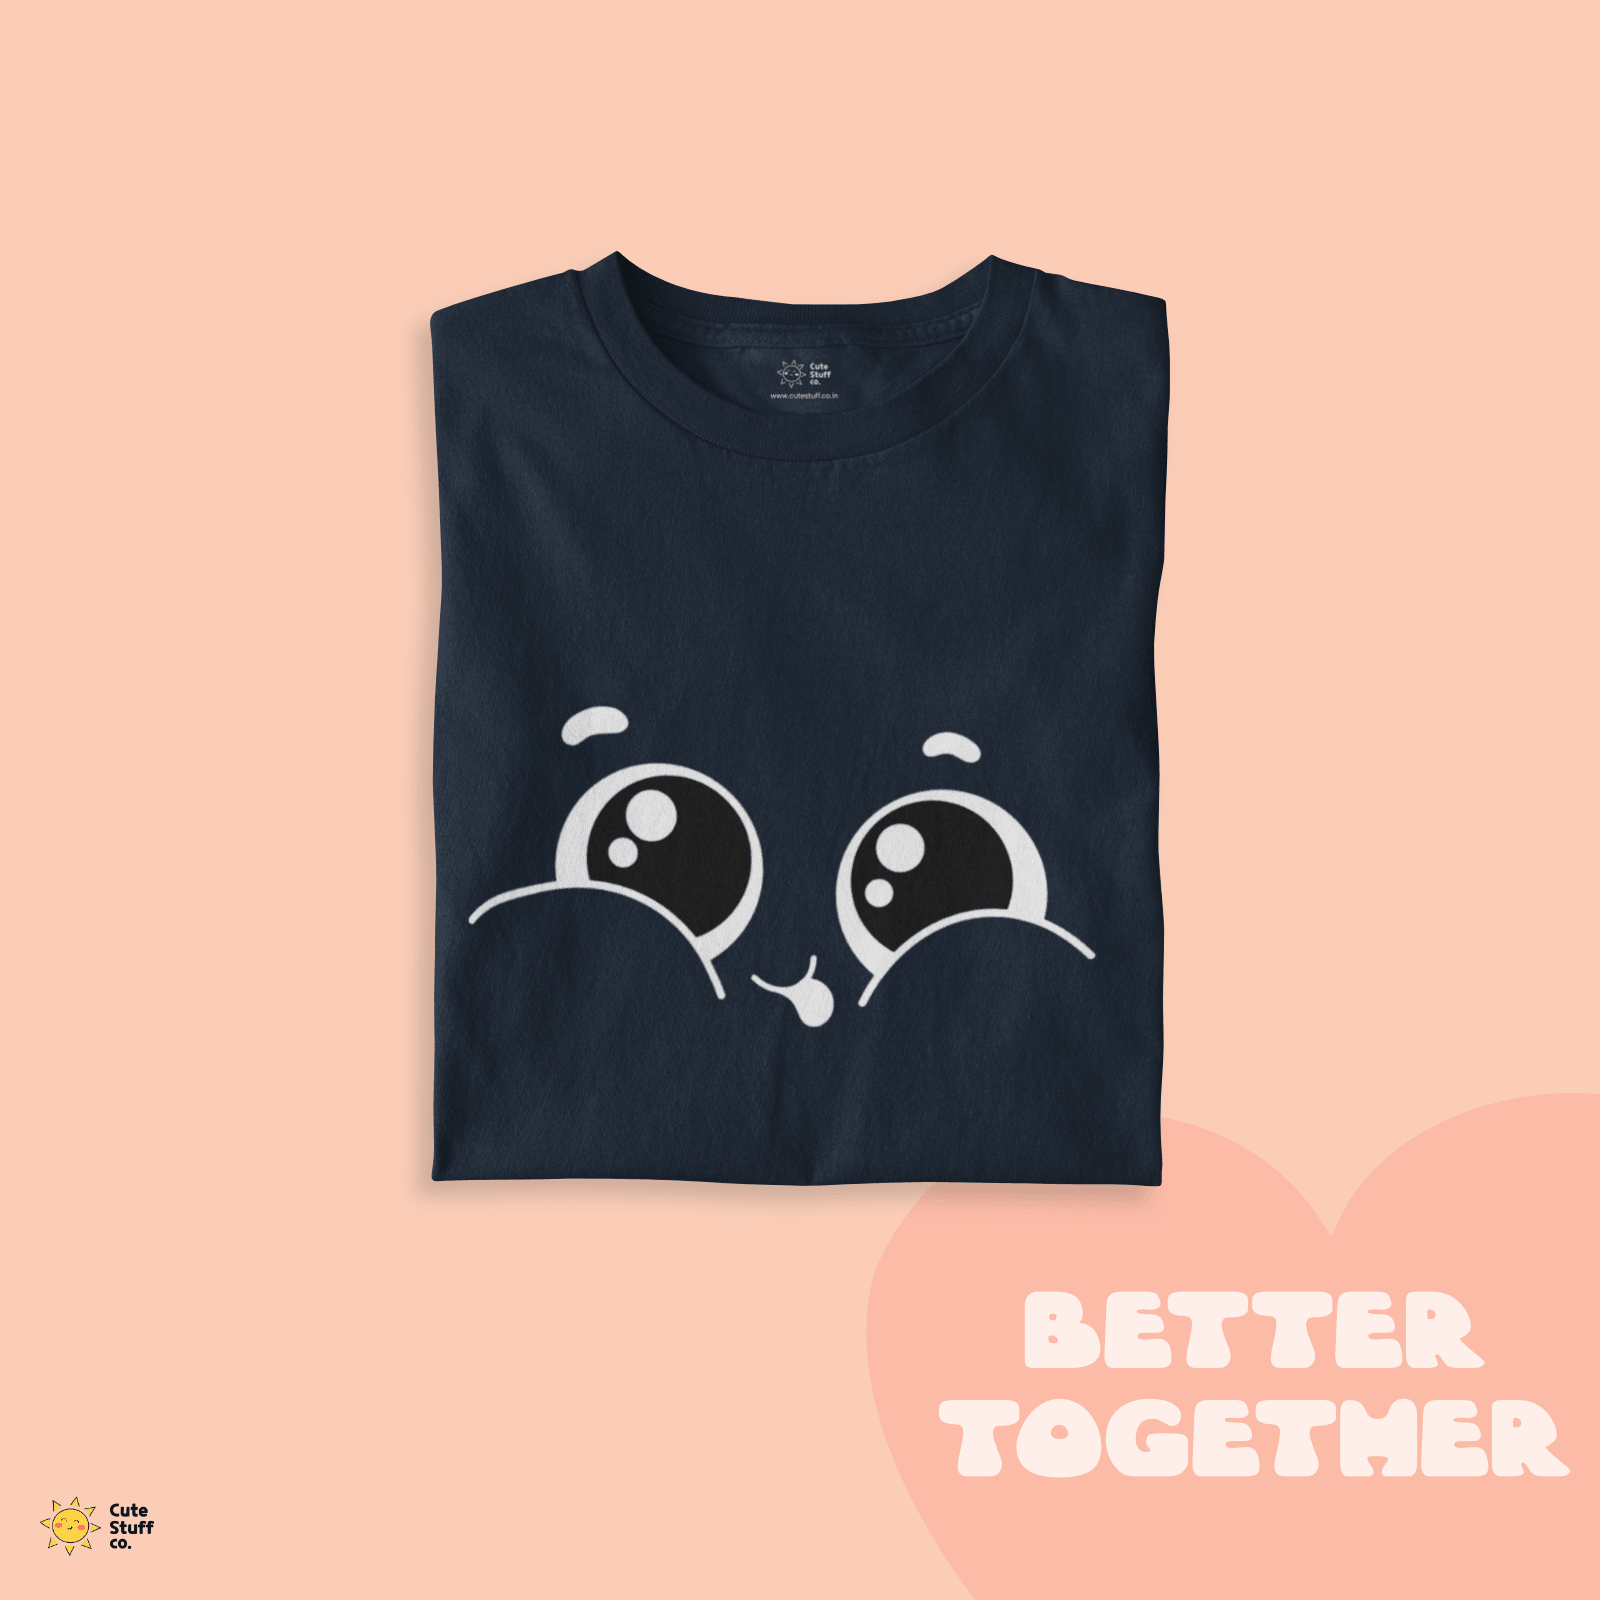 Cheeky Unisex Oversized T-shirts - Better Together - Cute Stuff India